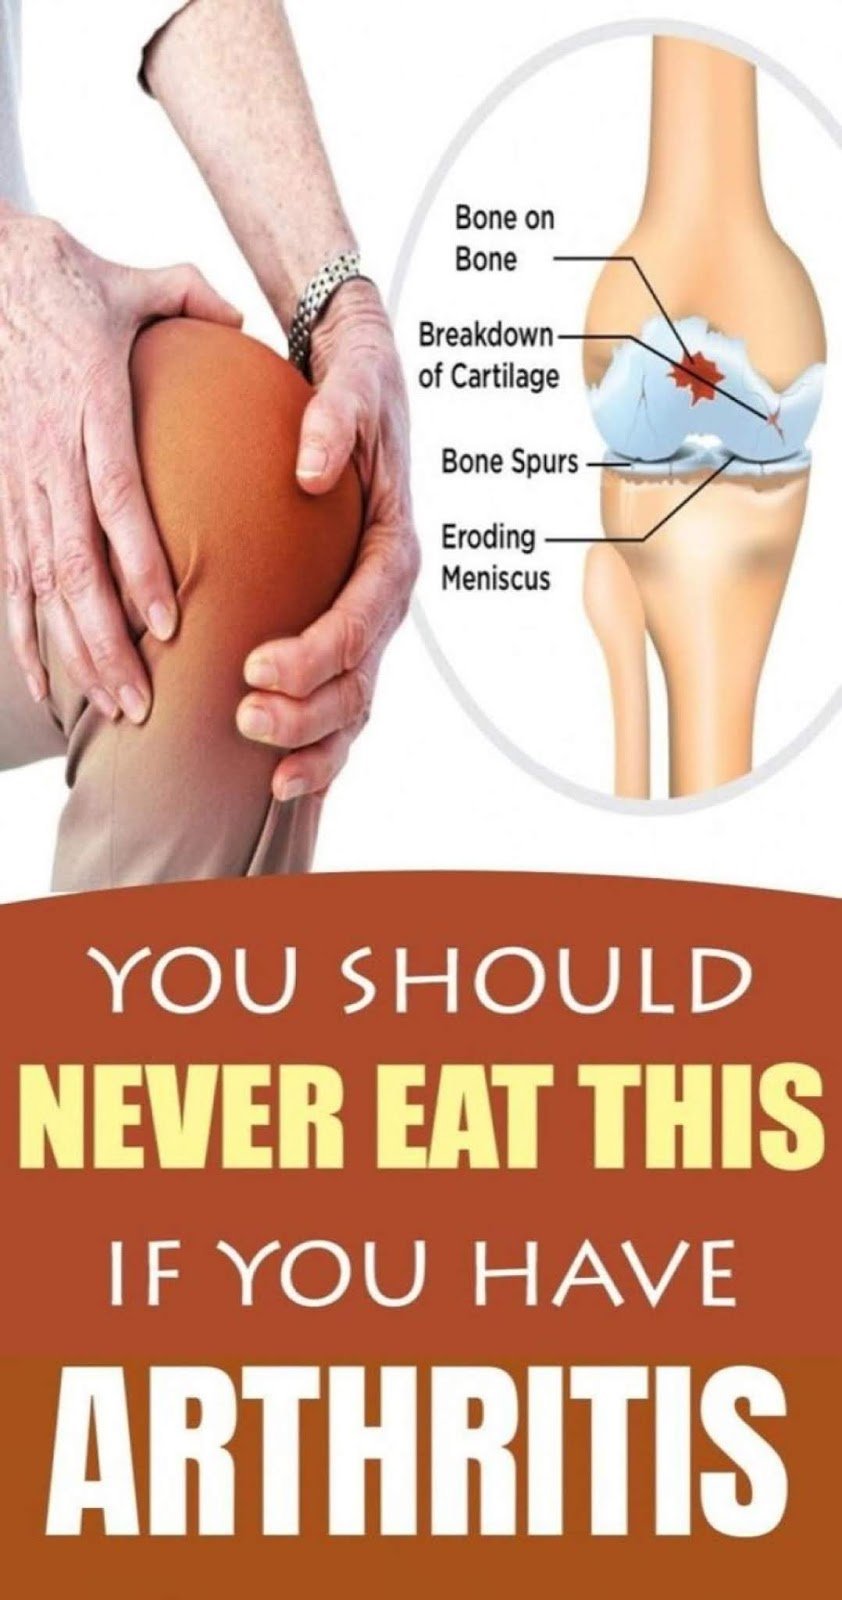 9 FOODS YOU SHOULD NEVER EAT IF YOU HAVE ARTHRITIS!